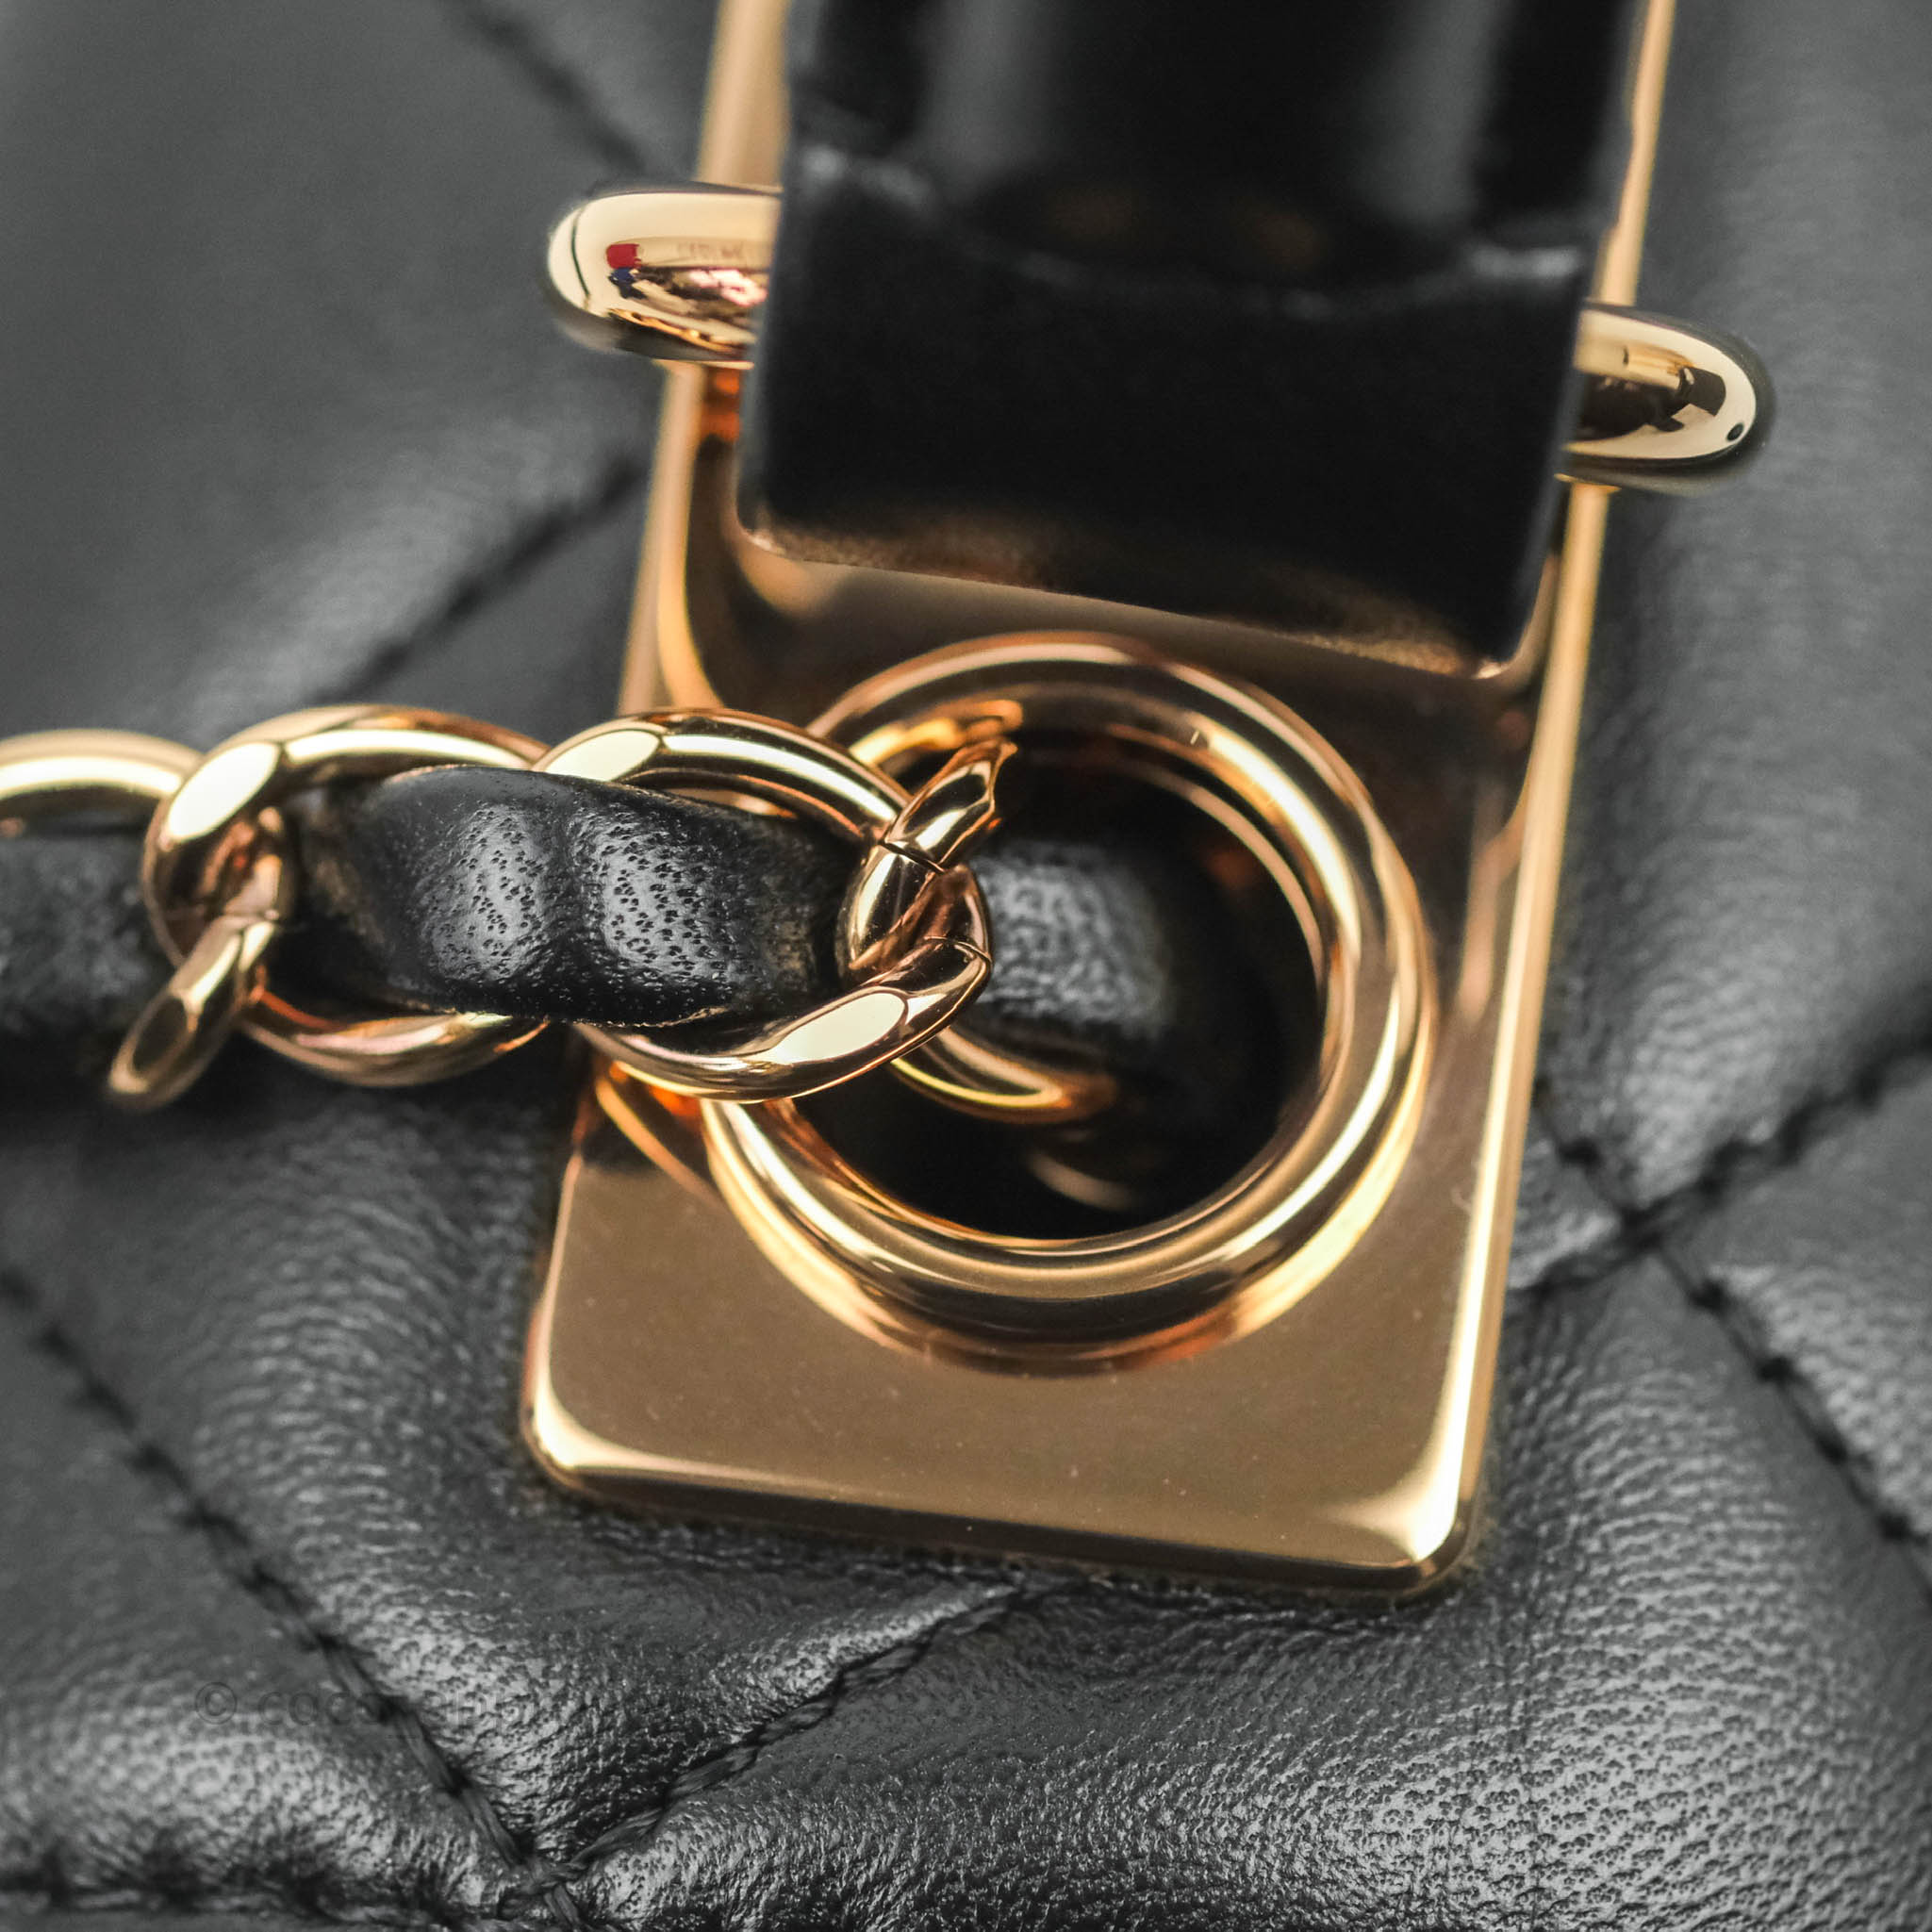 Chanel Wallet On Chain leather crossbody bag - ShopStyle